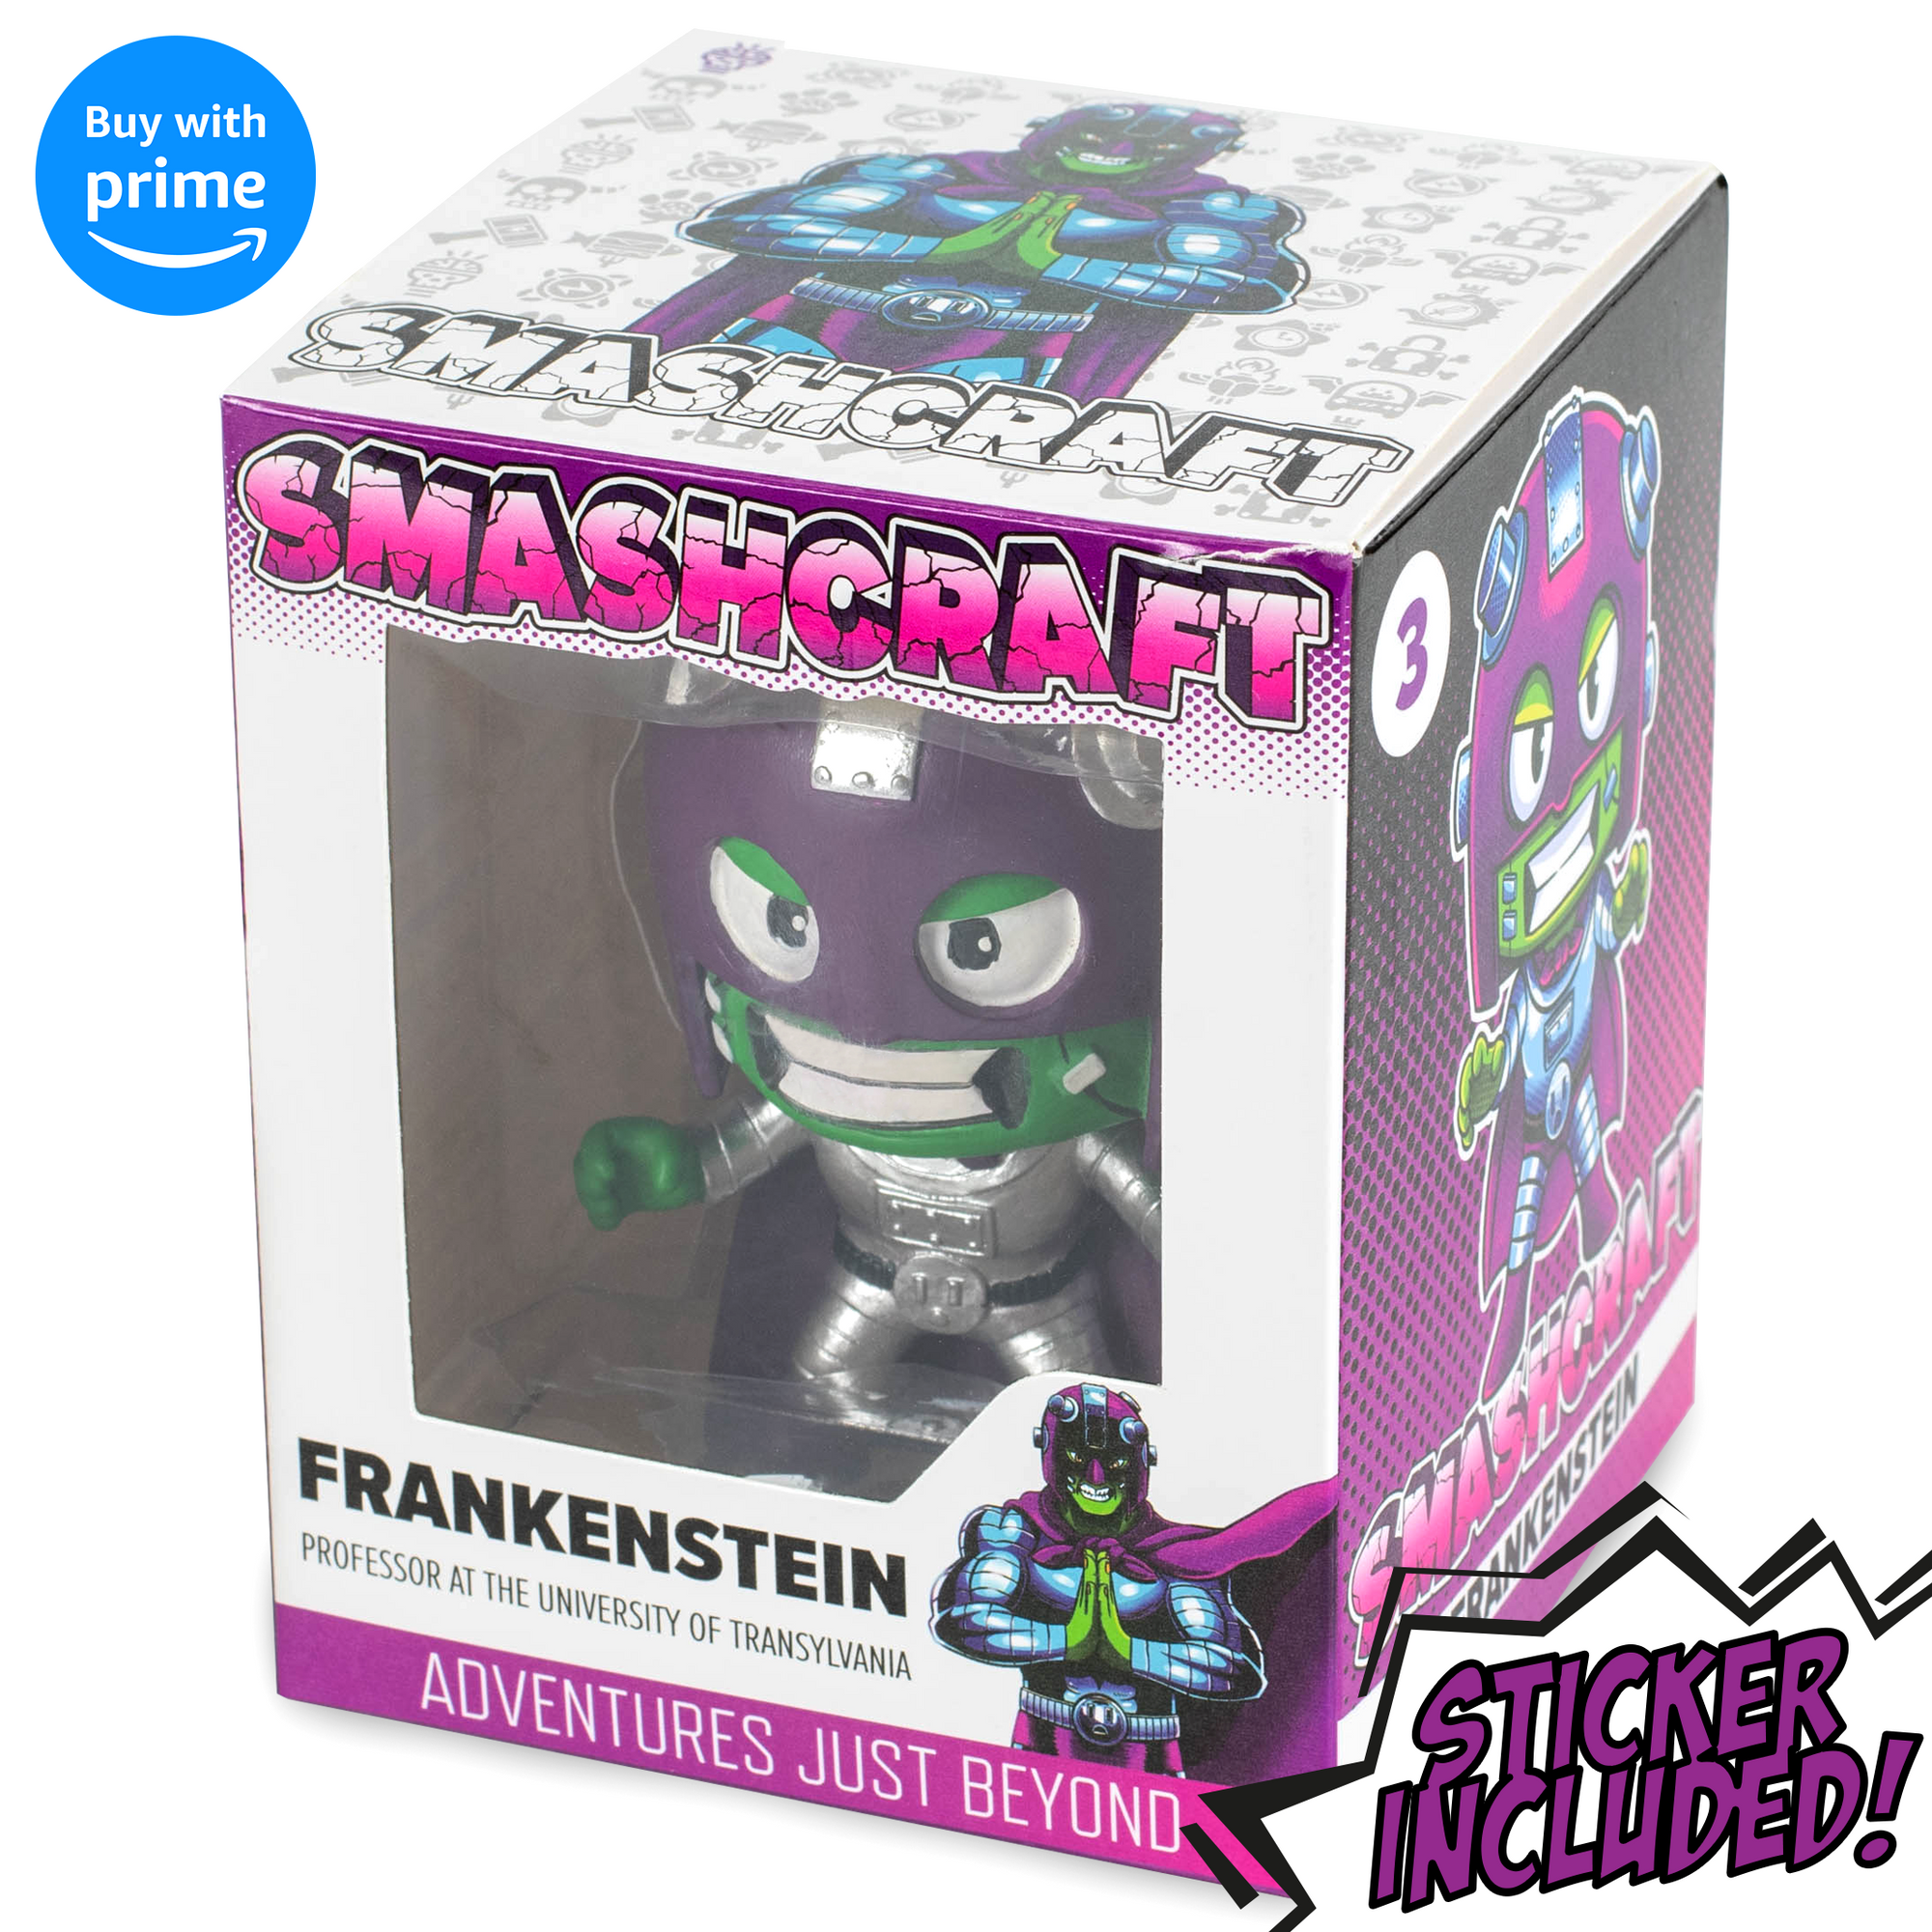 Smashcraft Frankenstein collectors box, with back story and memorabilia monster character sticker